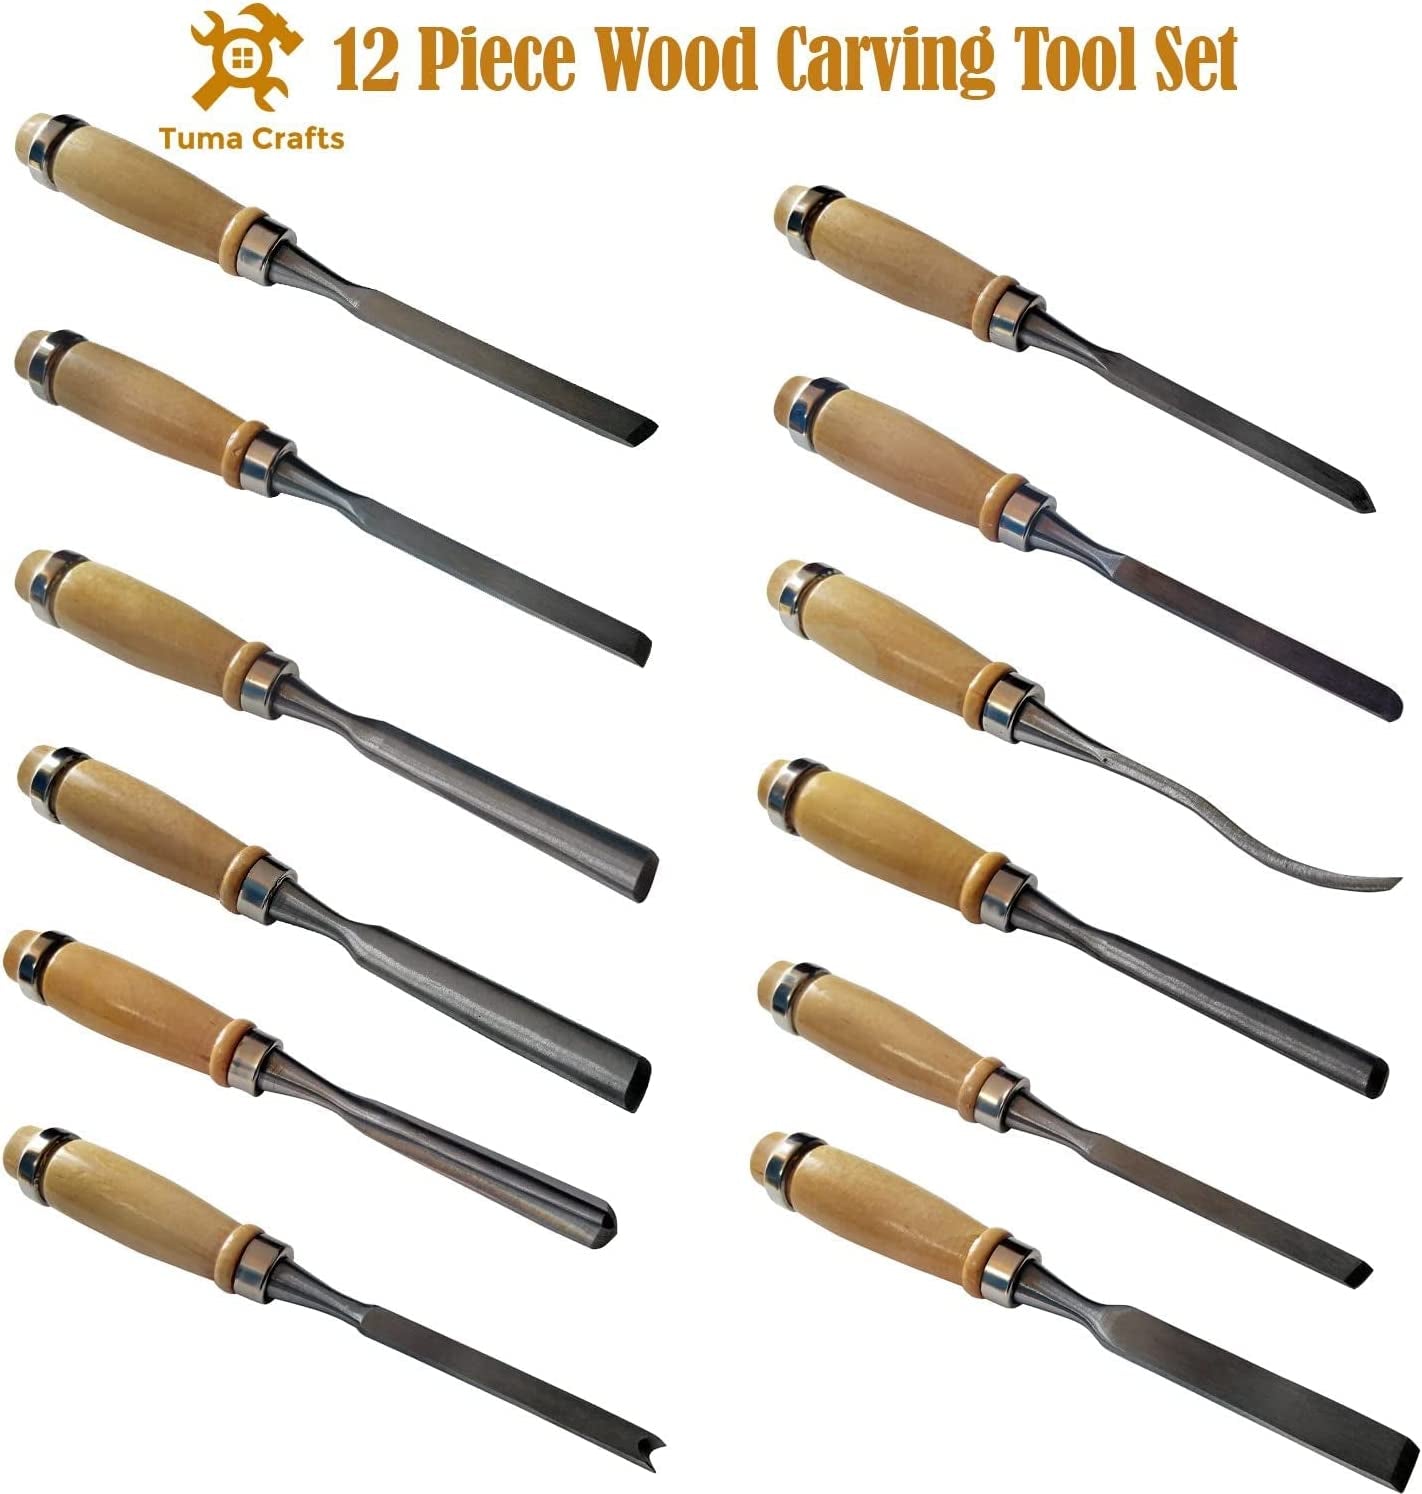 Wood Carving Chisels Sets - 12 Pcs, DIY Wood Carving Kit for Beginners, Sharp Woodworking Tools, Ideal for Beginners Gift